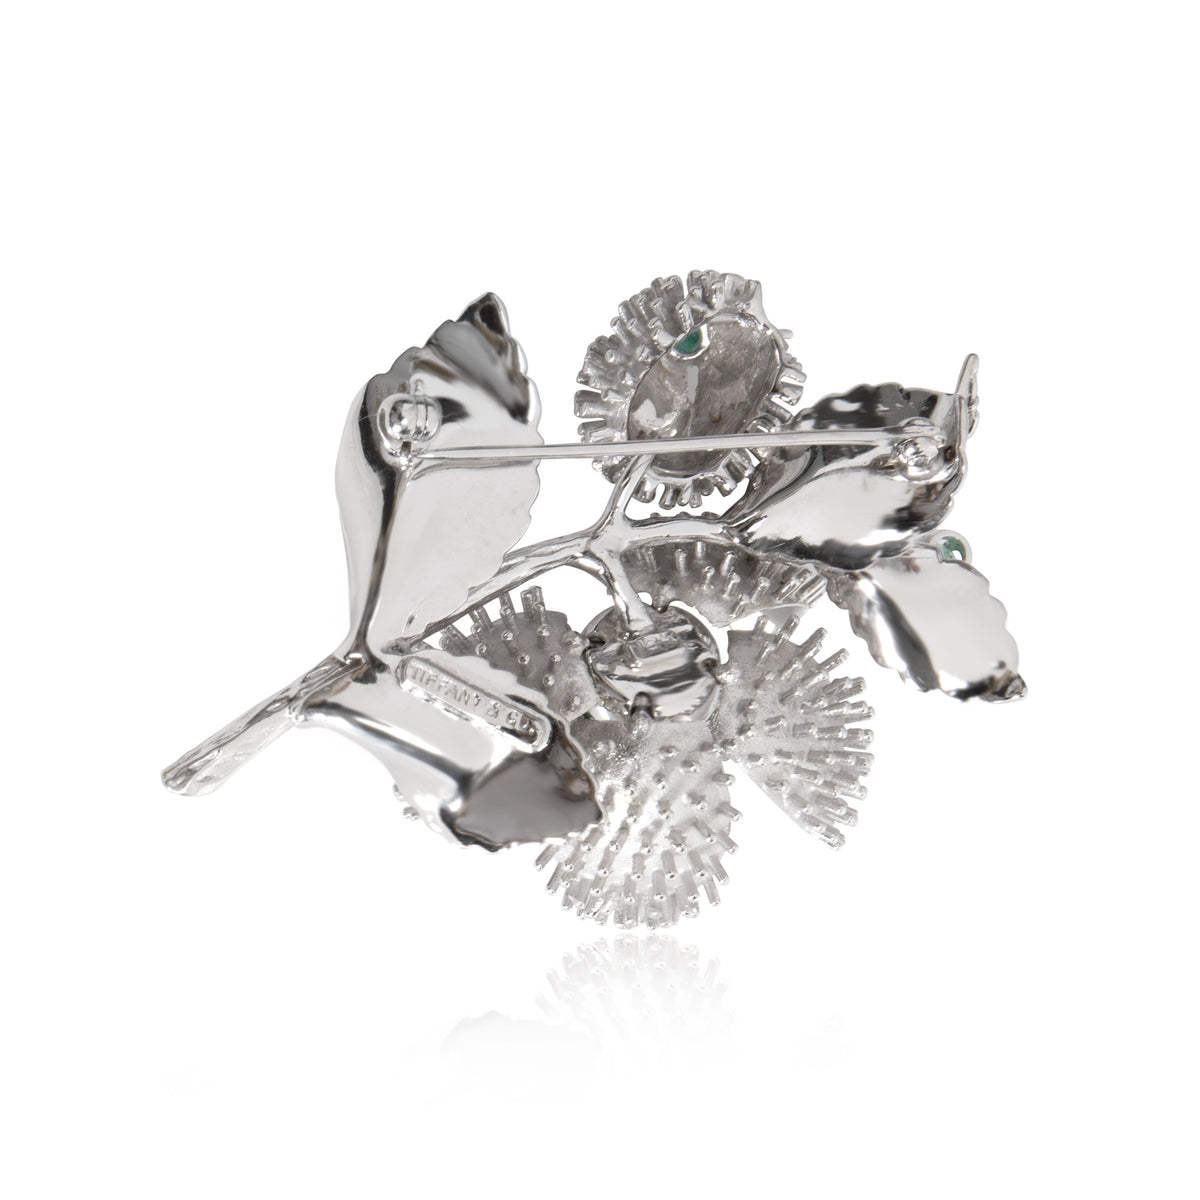 Tiffany & Co. Articulating Cactus Diamond Brooch in 18K White Gold 0.12 CTW